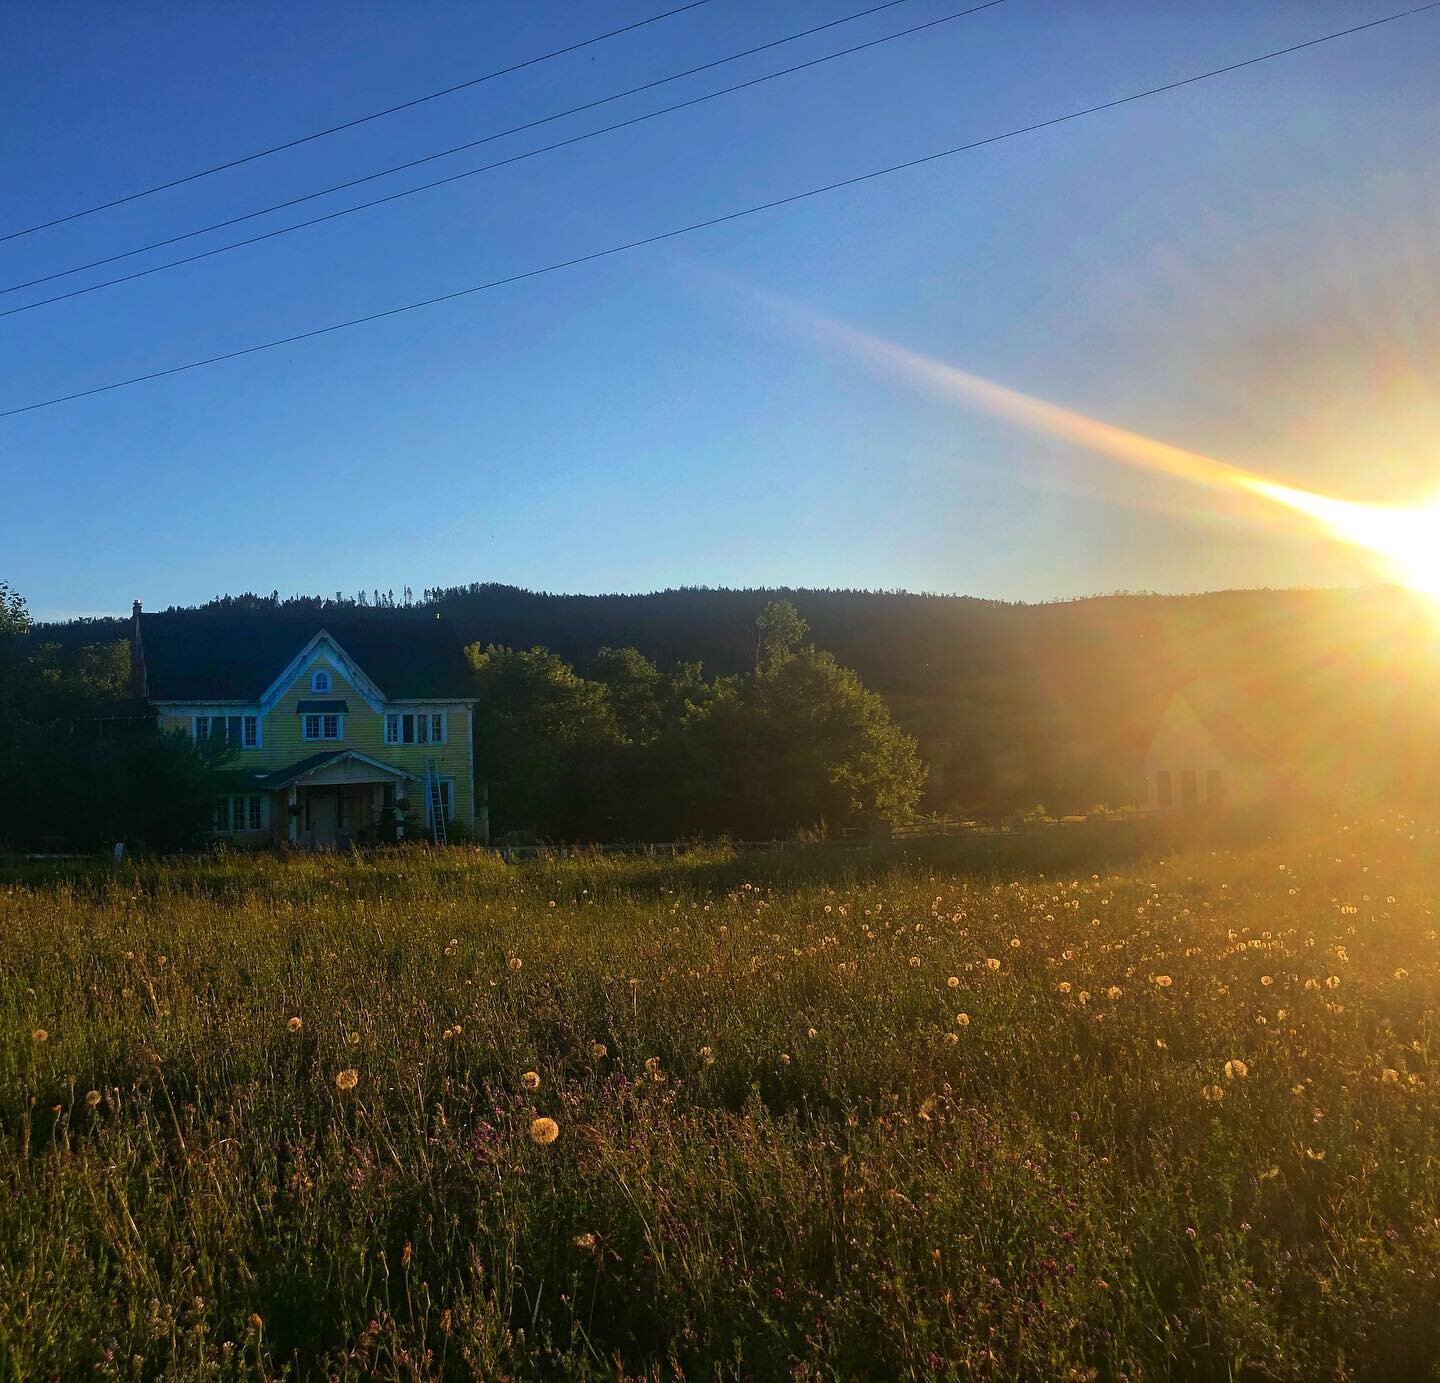 Sunset walk...home calls across the field....alfalfa is in bloom &mdash;&mdash;it&rsquo;s the first day of haying!  Finally the weather is being friendly to us farmers. Enjoy this glorious weekend!!
&bull;
&bull;
&bull;
#onwardranch #sunshinehouse #o